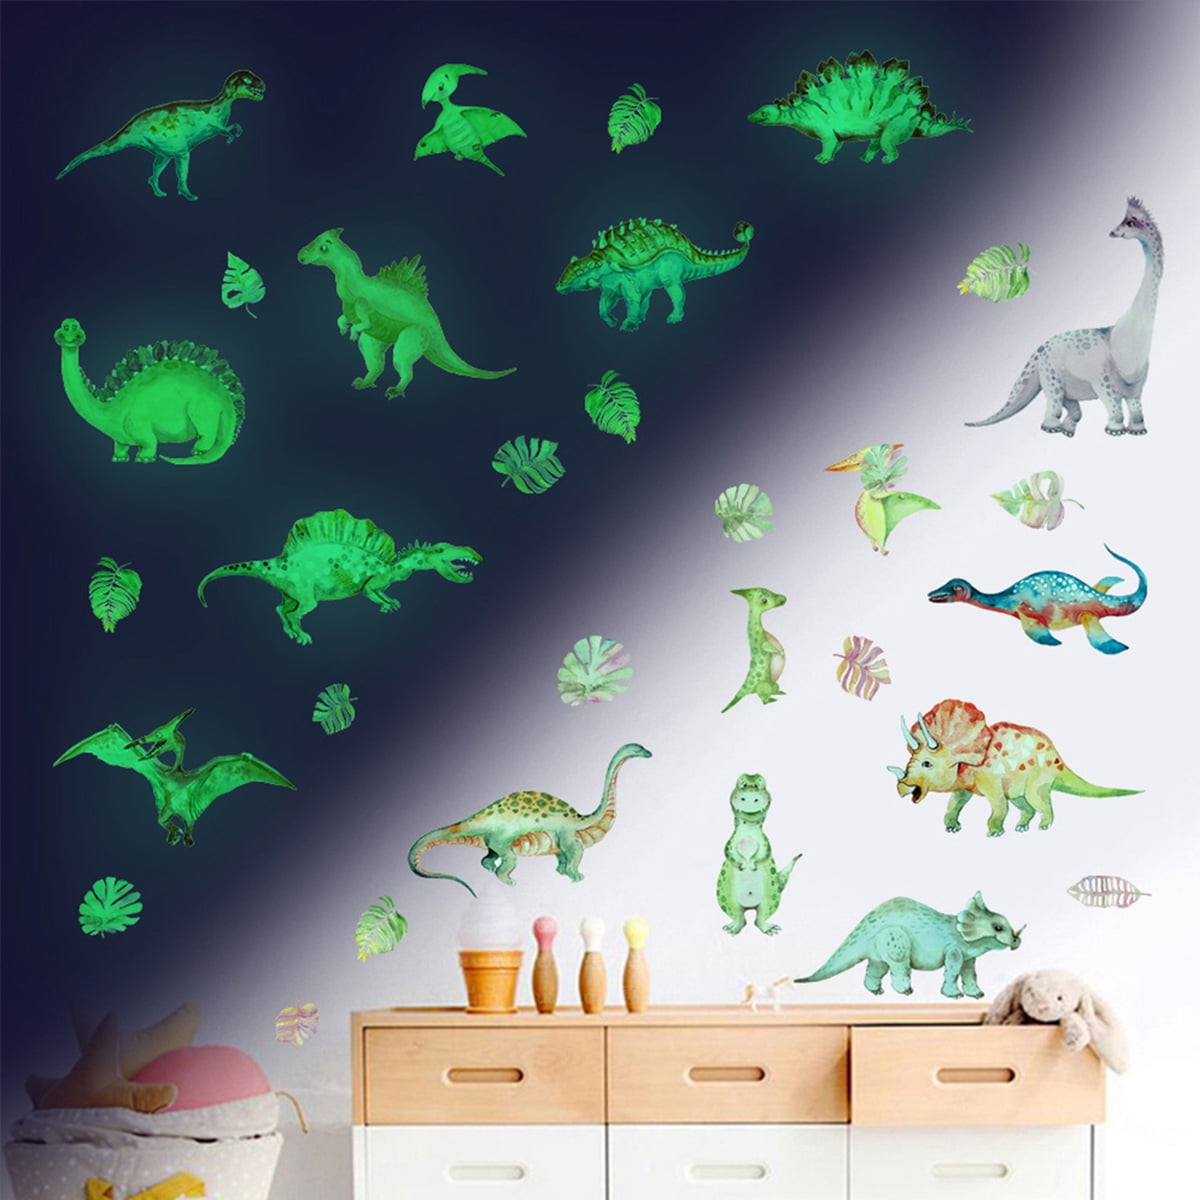 18x Dinosaur Ceiling Wall Glowing Stickers Glow In The Dark Removable Decal